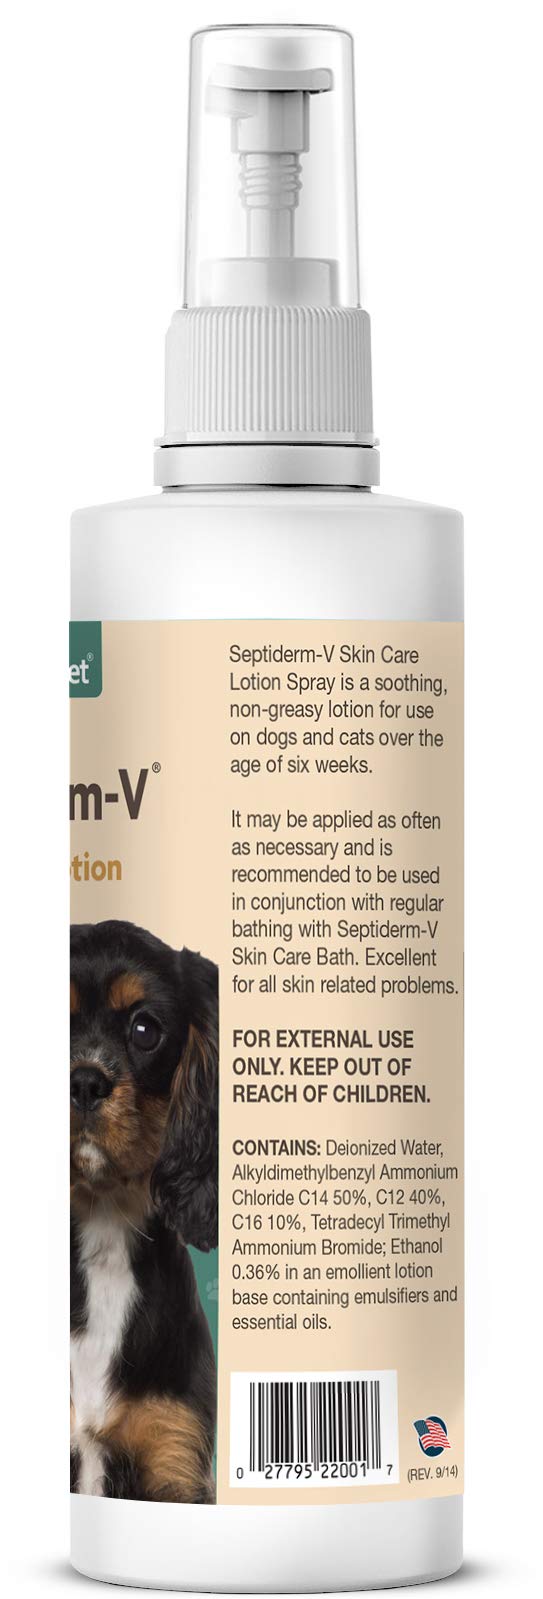 [Australia] - NaturVet - Septiderm-V Skin Care Lotion Spray - 8 oz - Helps Relieve Itching Due to Skin Problems - Use for Hot Spots, Dermatitis, Skin Allergies - for Dogs & Cats 